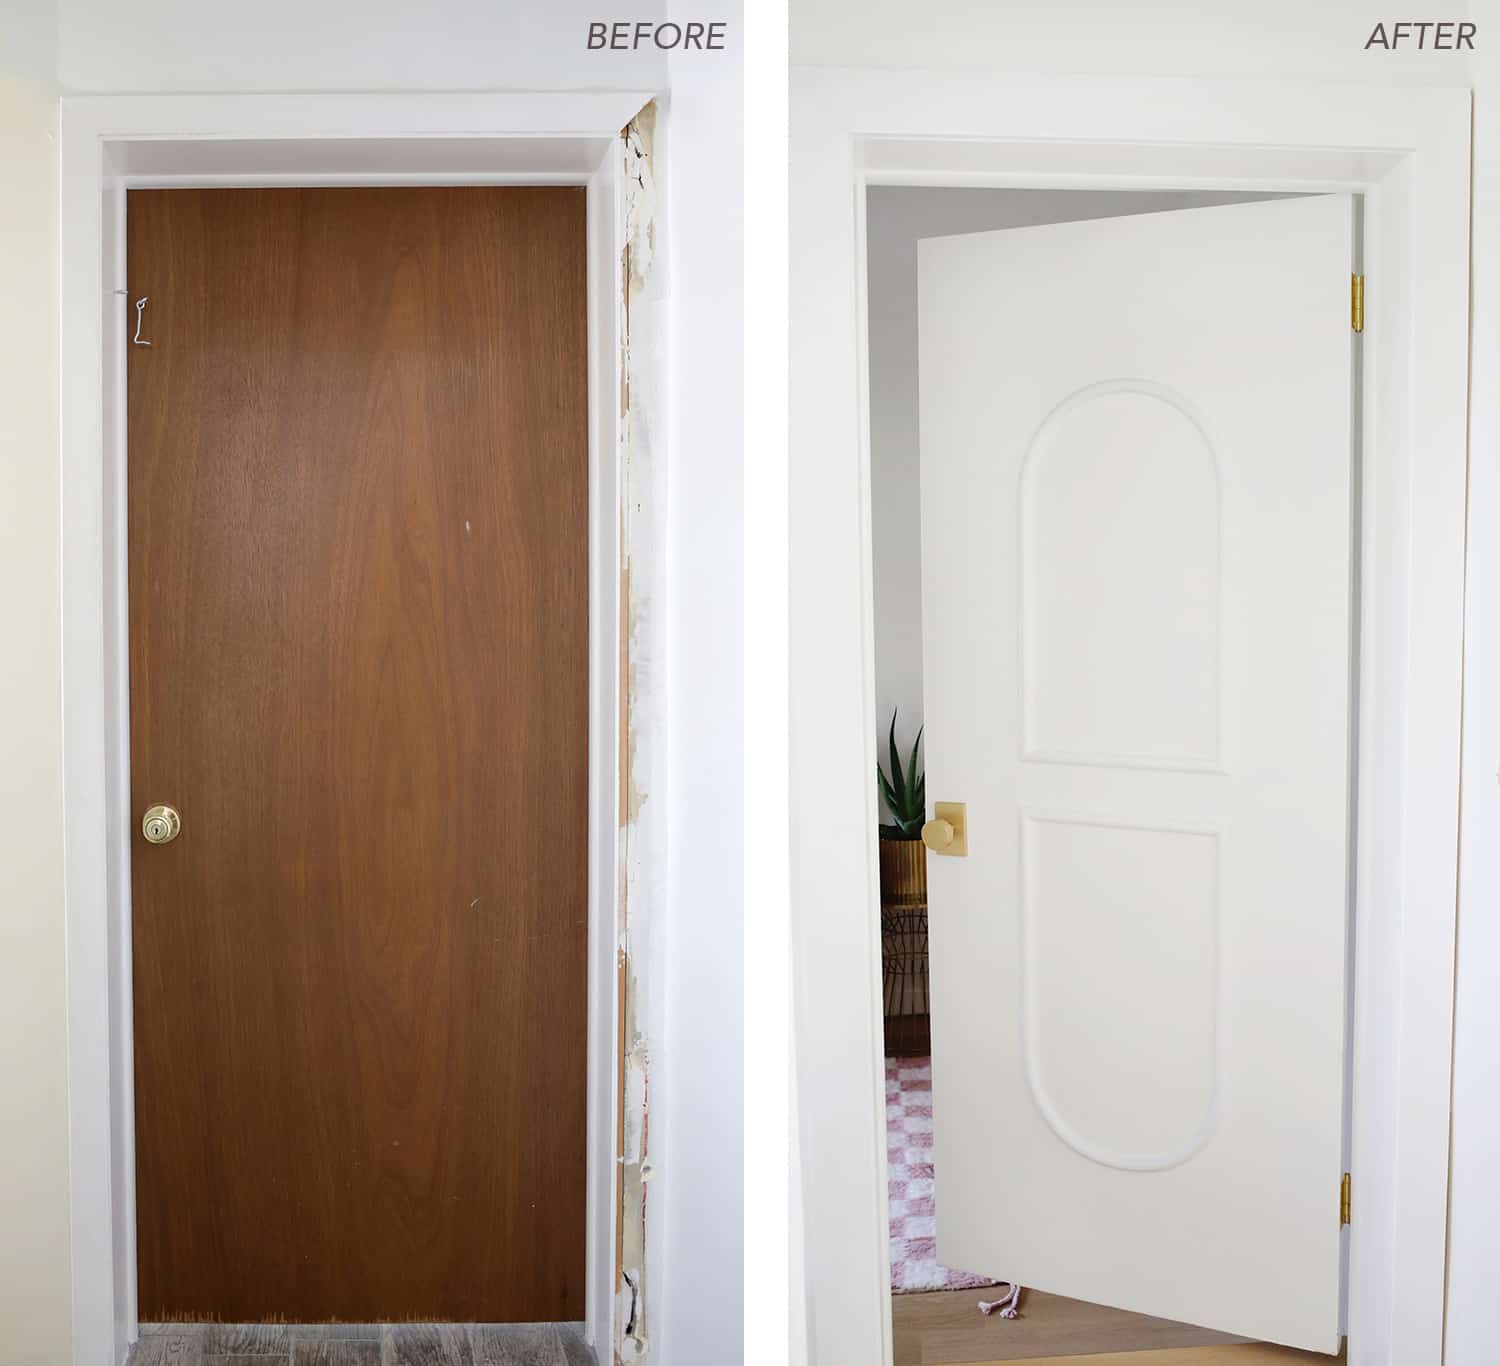 Before and after versions of brown door painted white with new hardware